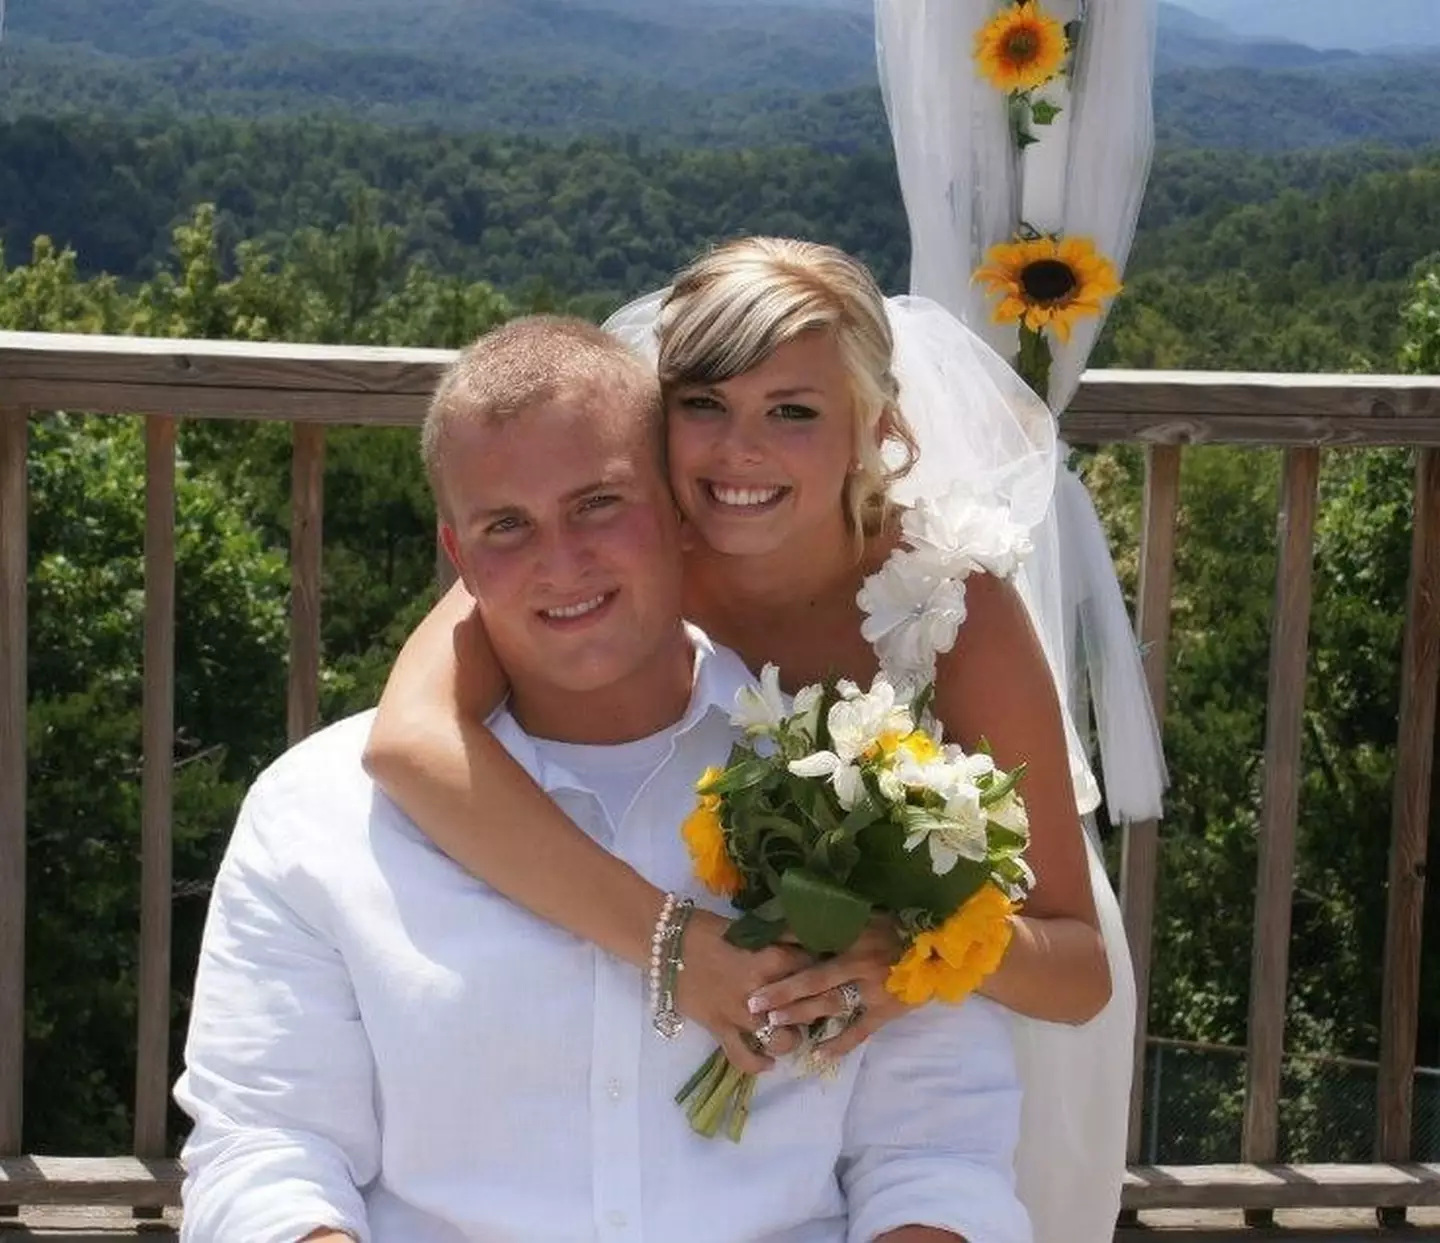 Desiree and Bryant on their wedding day in 2012.